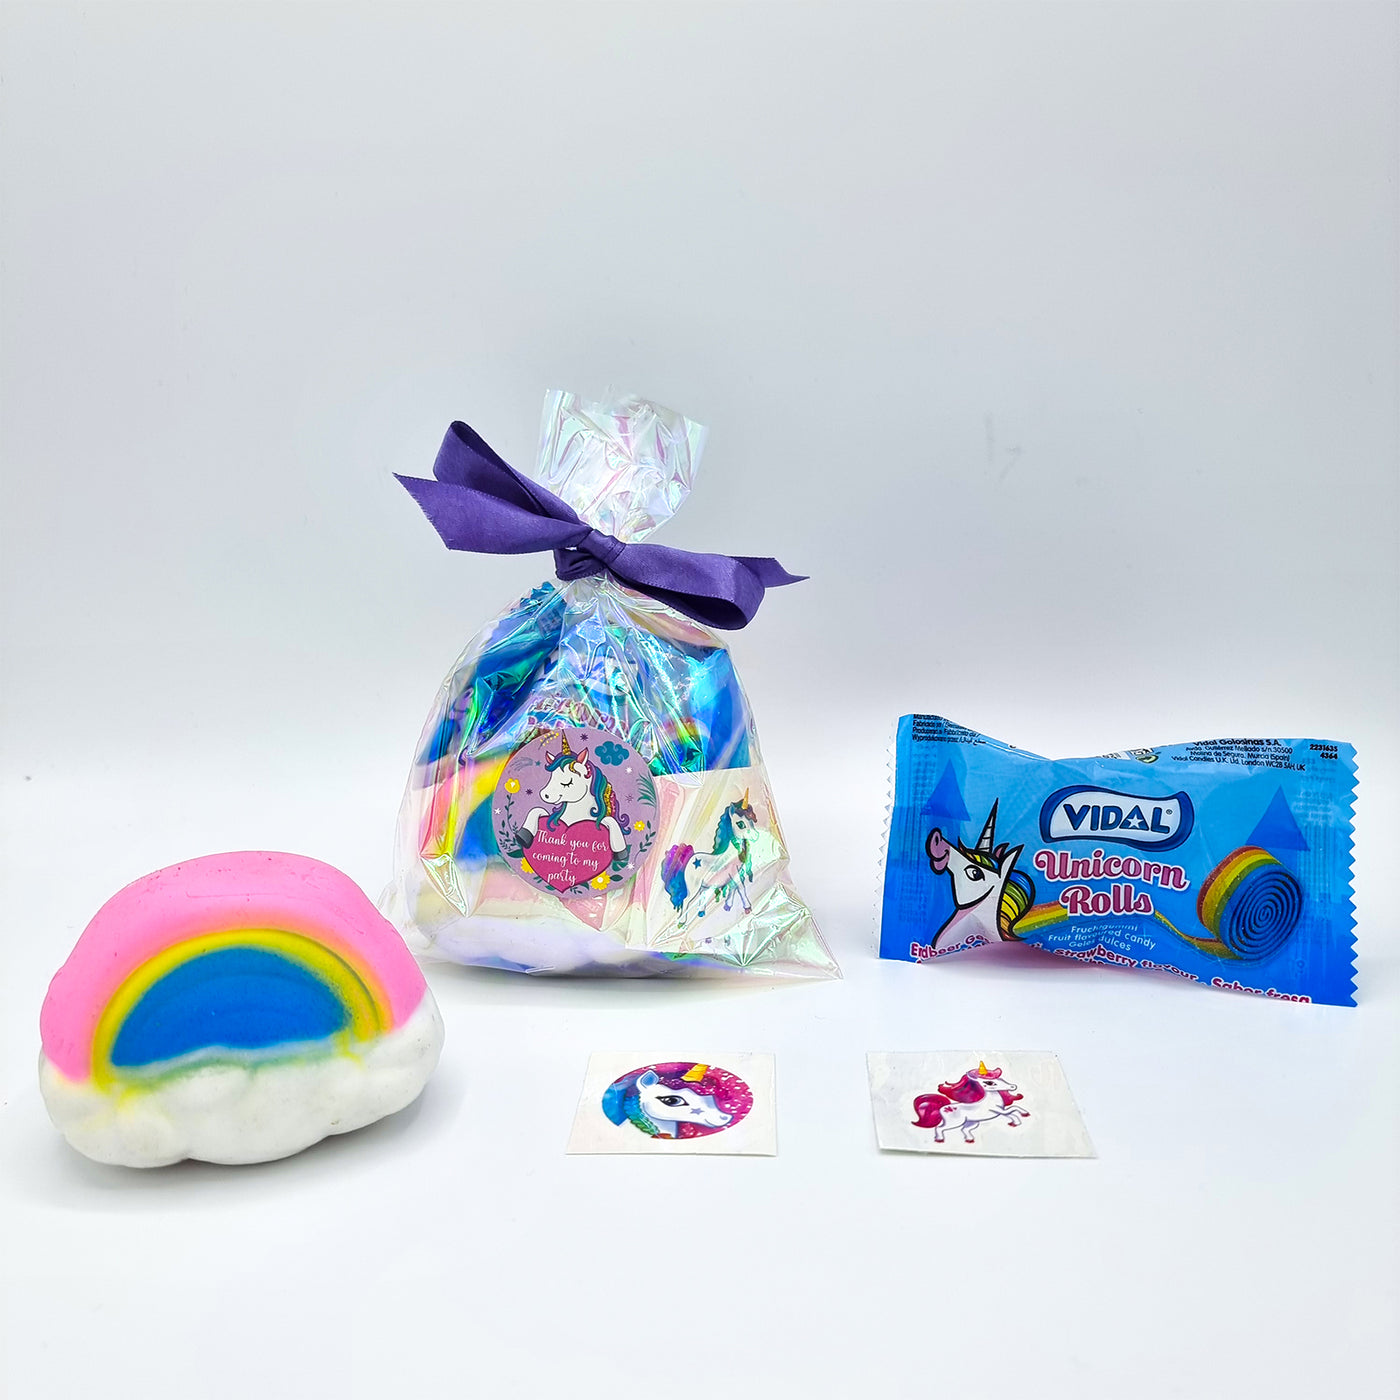 Unicorn Birthday Party Goodie Bags Party Favours For Girls And Boys With Sweets And Novelty Toys.